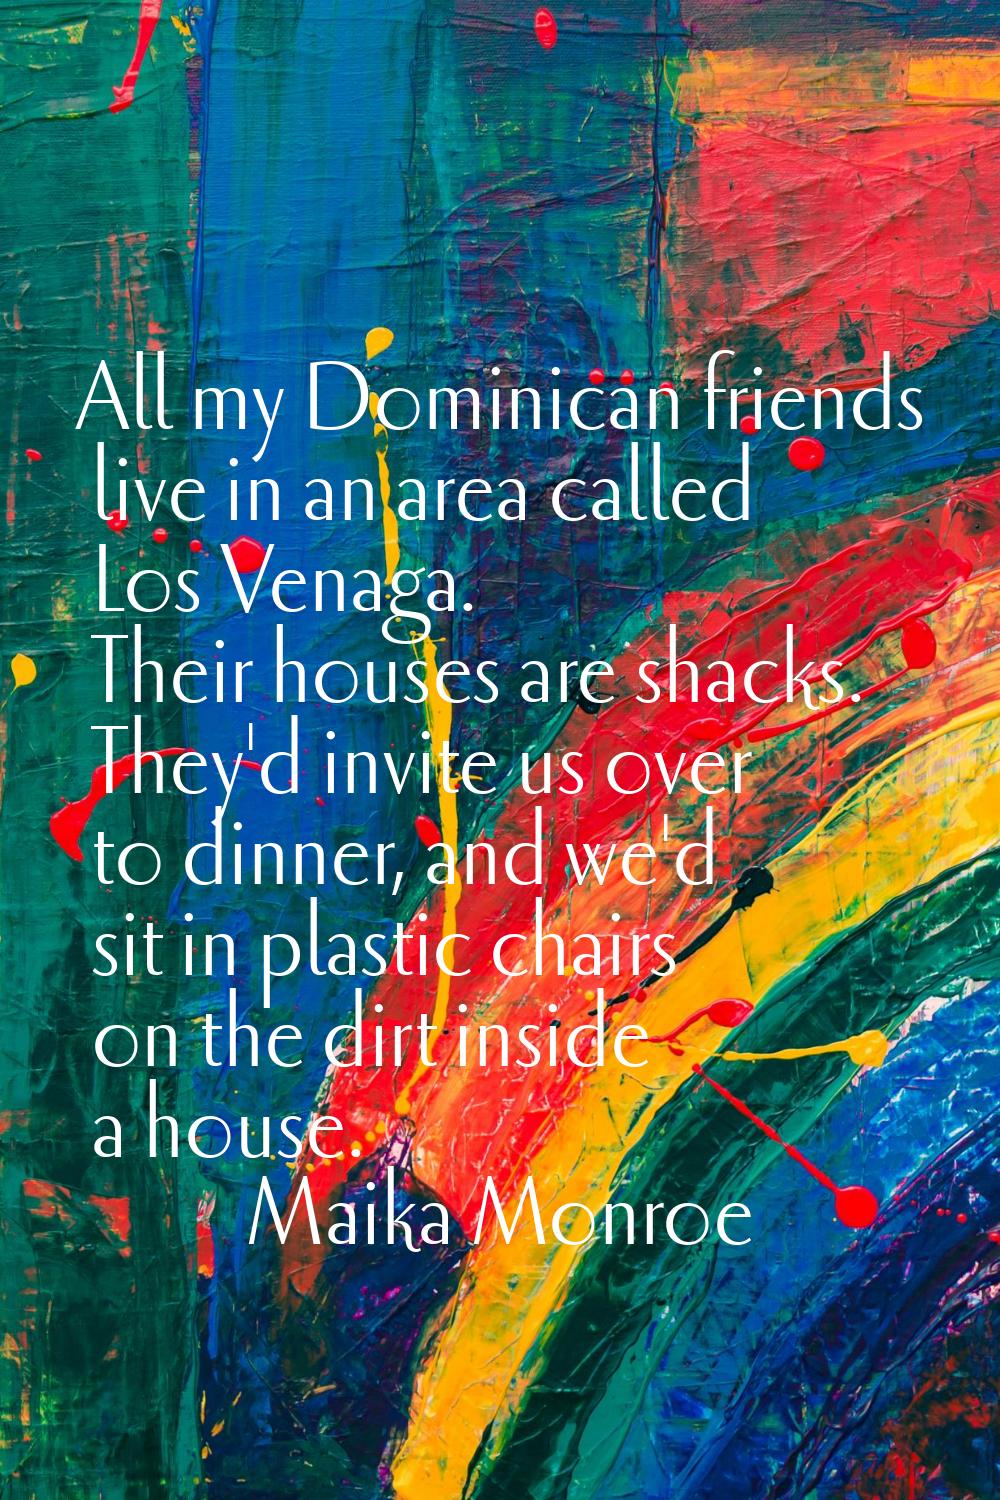 All my Dominican friends live in an area called Los Venaga. Their houses are shacks. They'd invite 